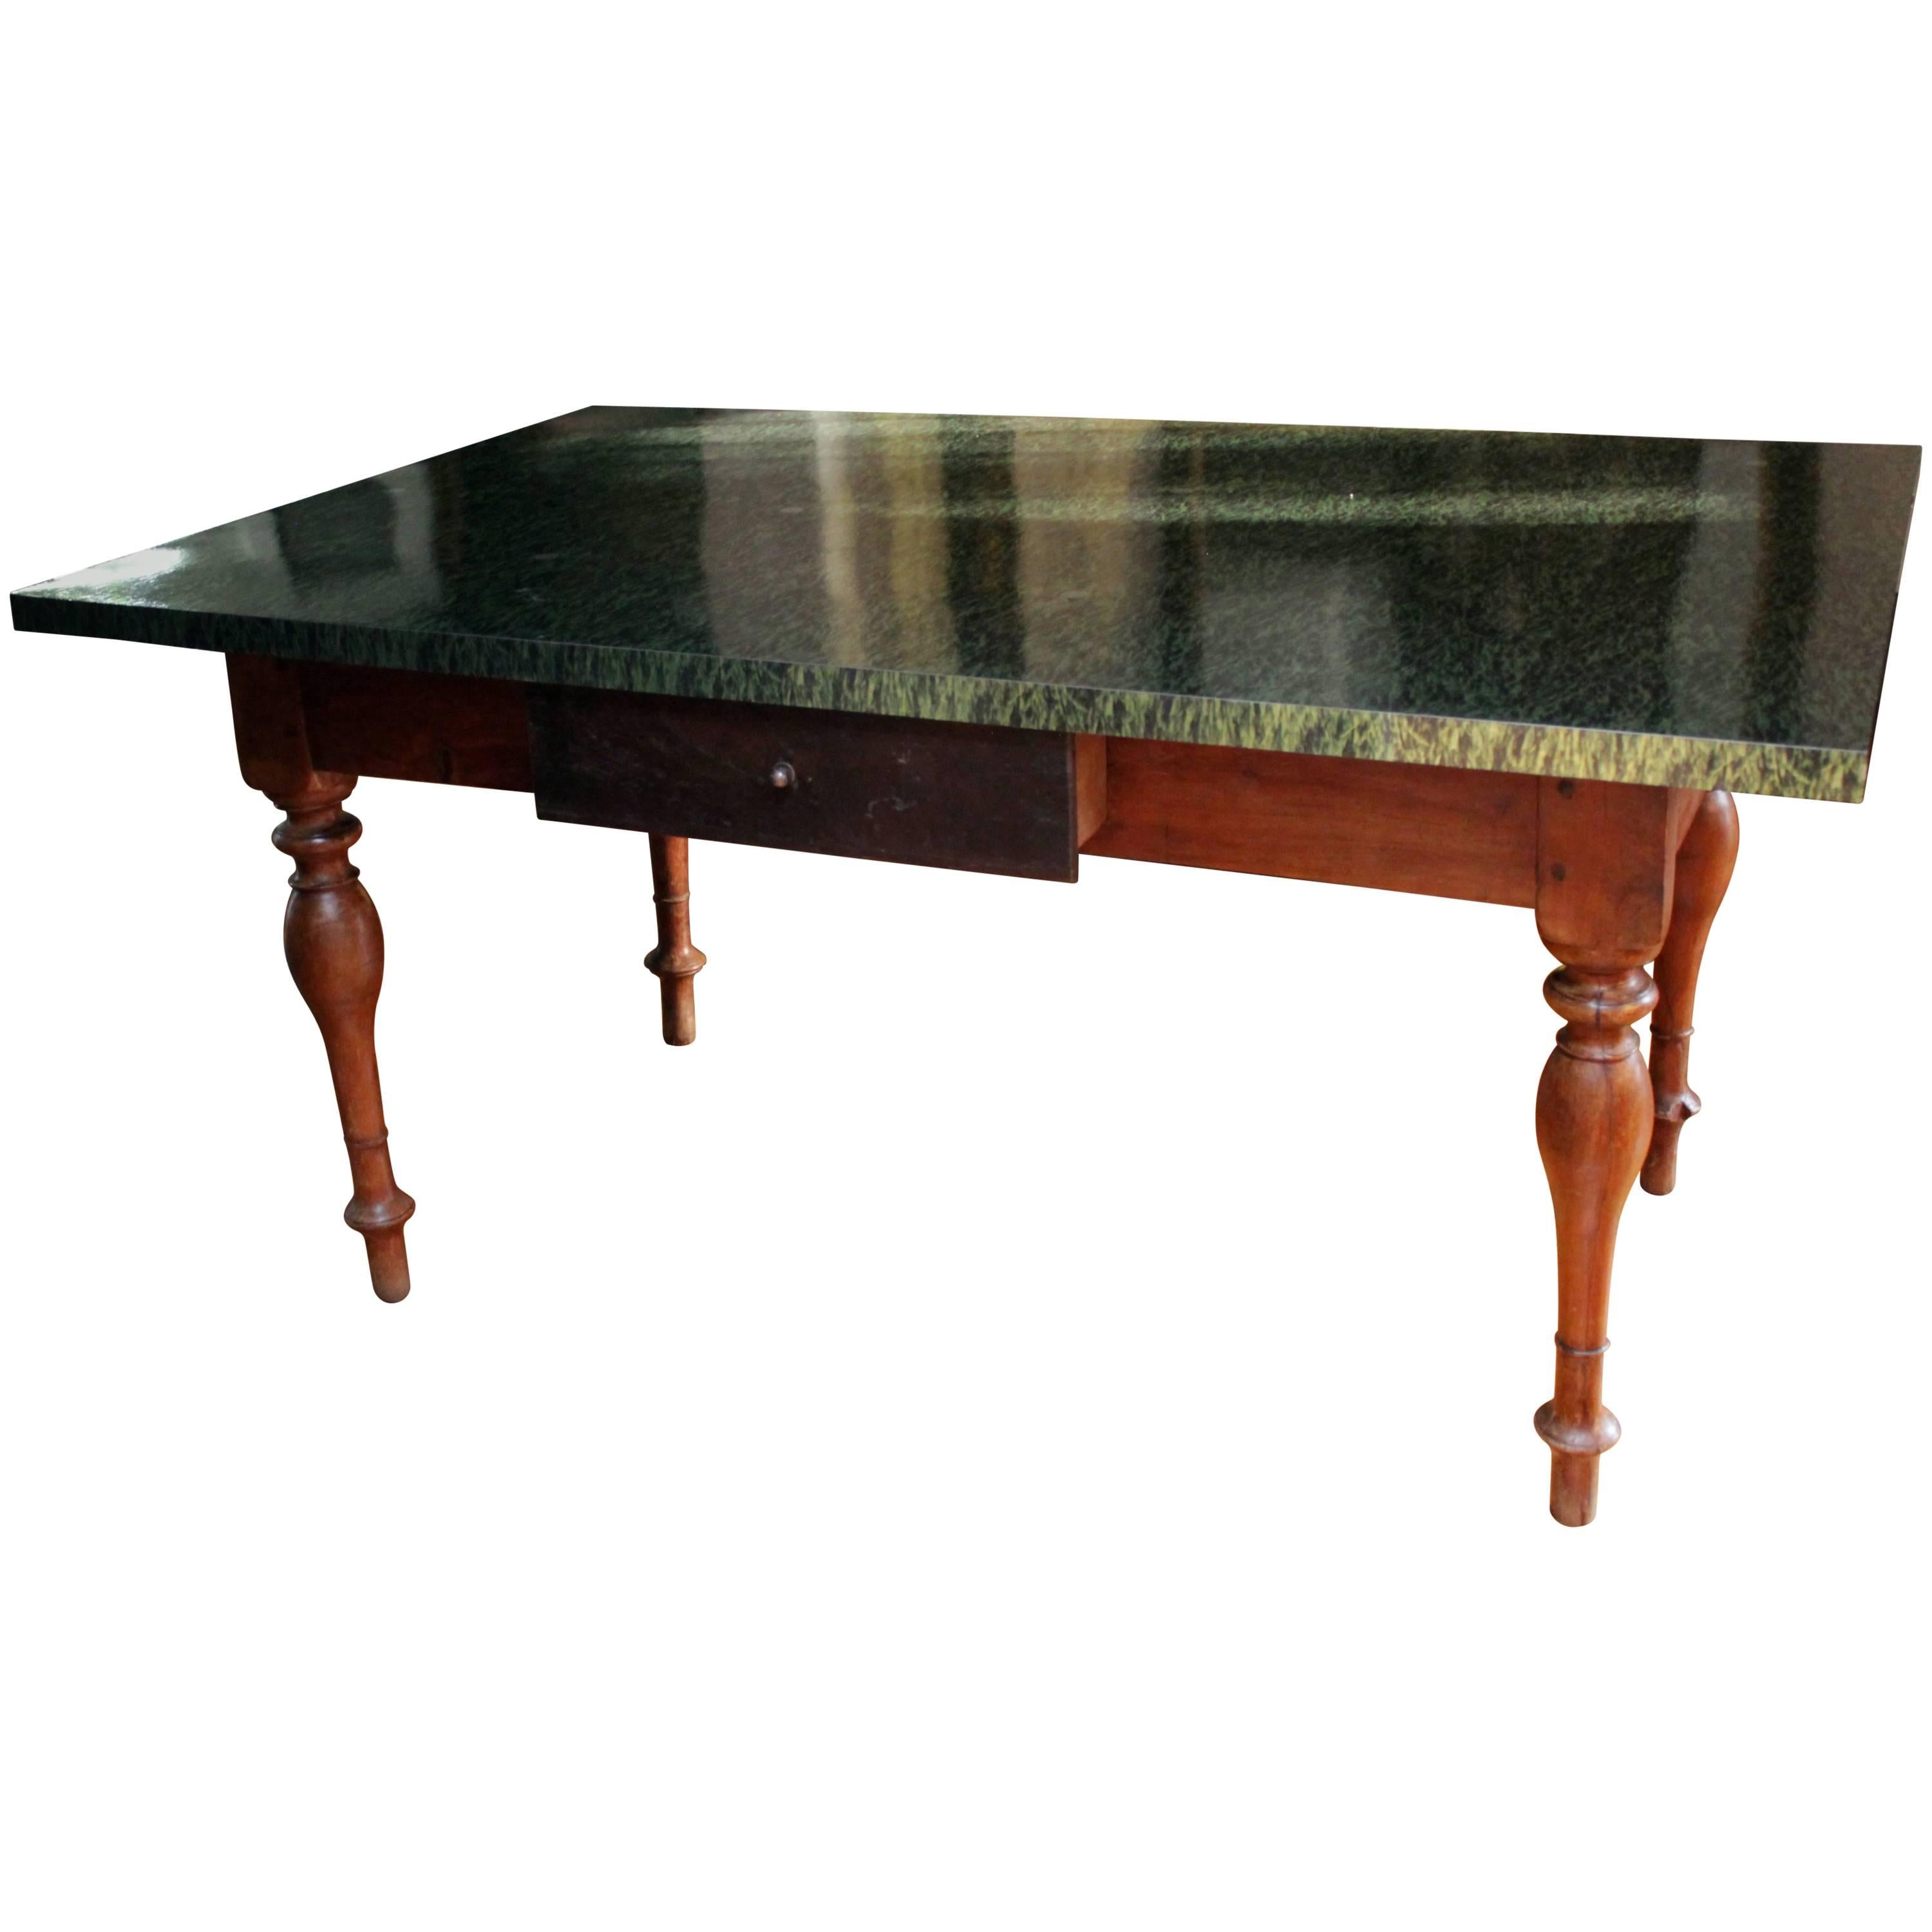 19th Century Red Cedar Wood Table, with Printed Grass and Silver Handle